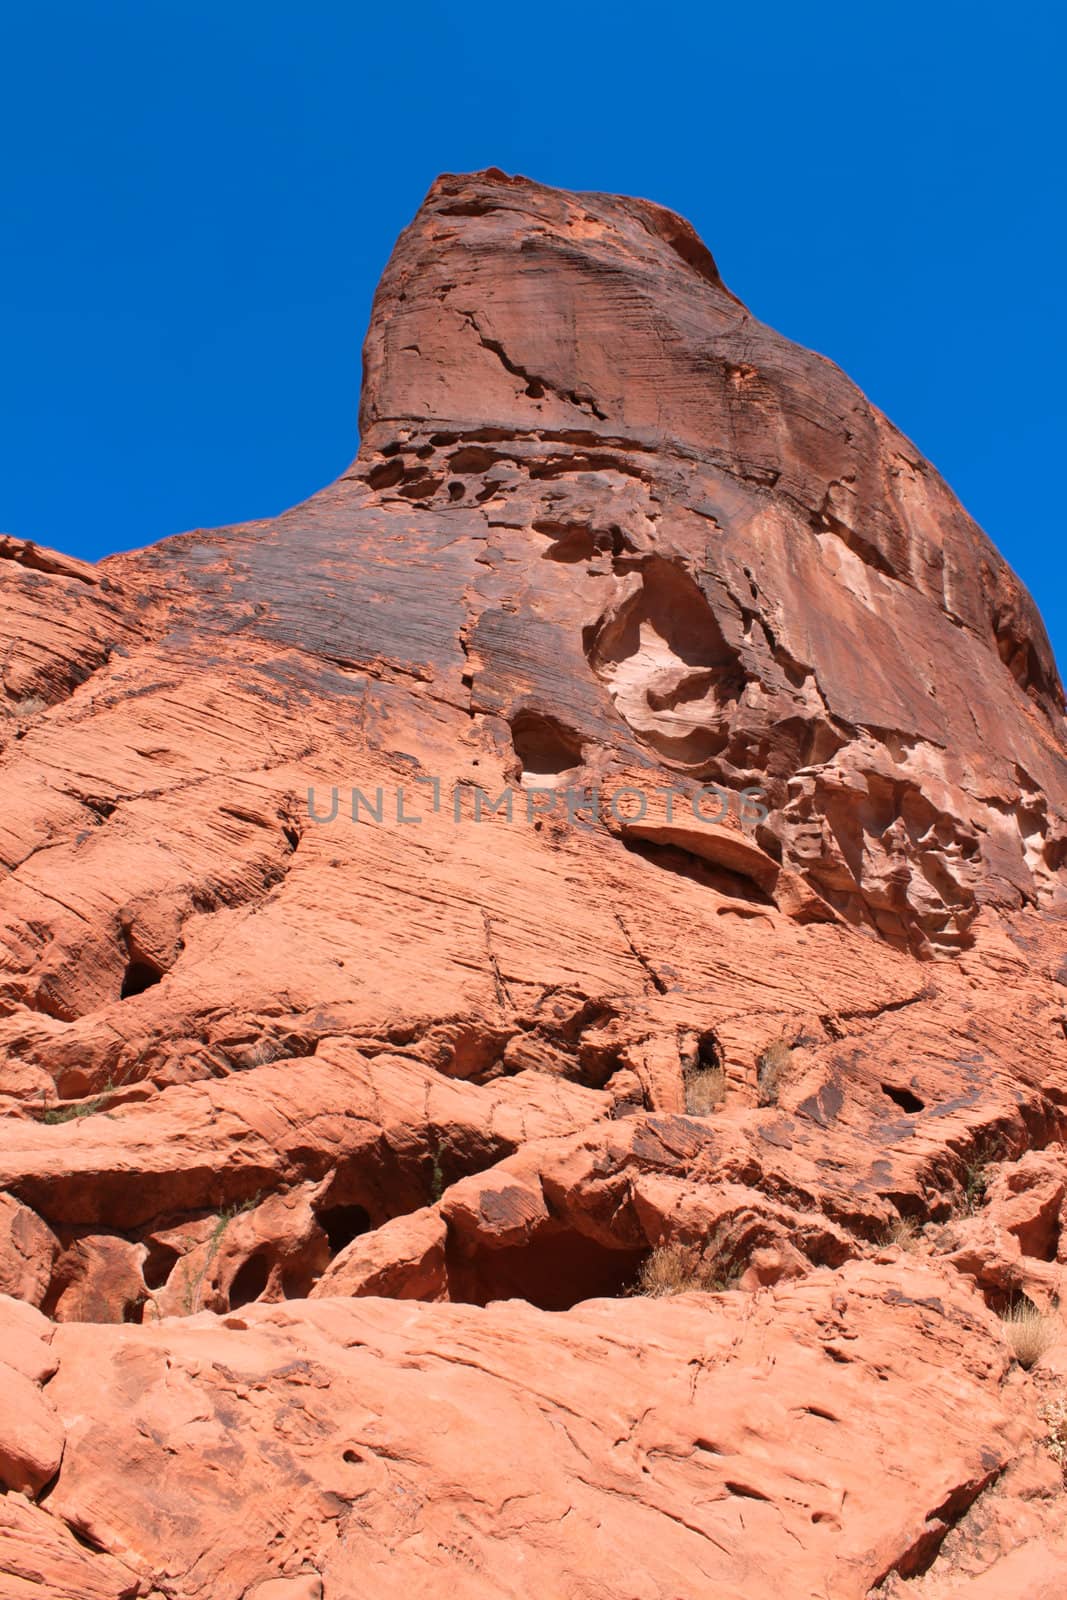 Giant red rock pinnacle at Valley of Fire State Park in Nevada.